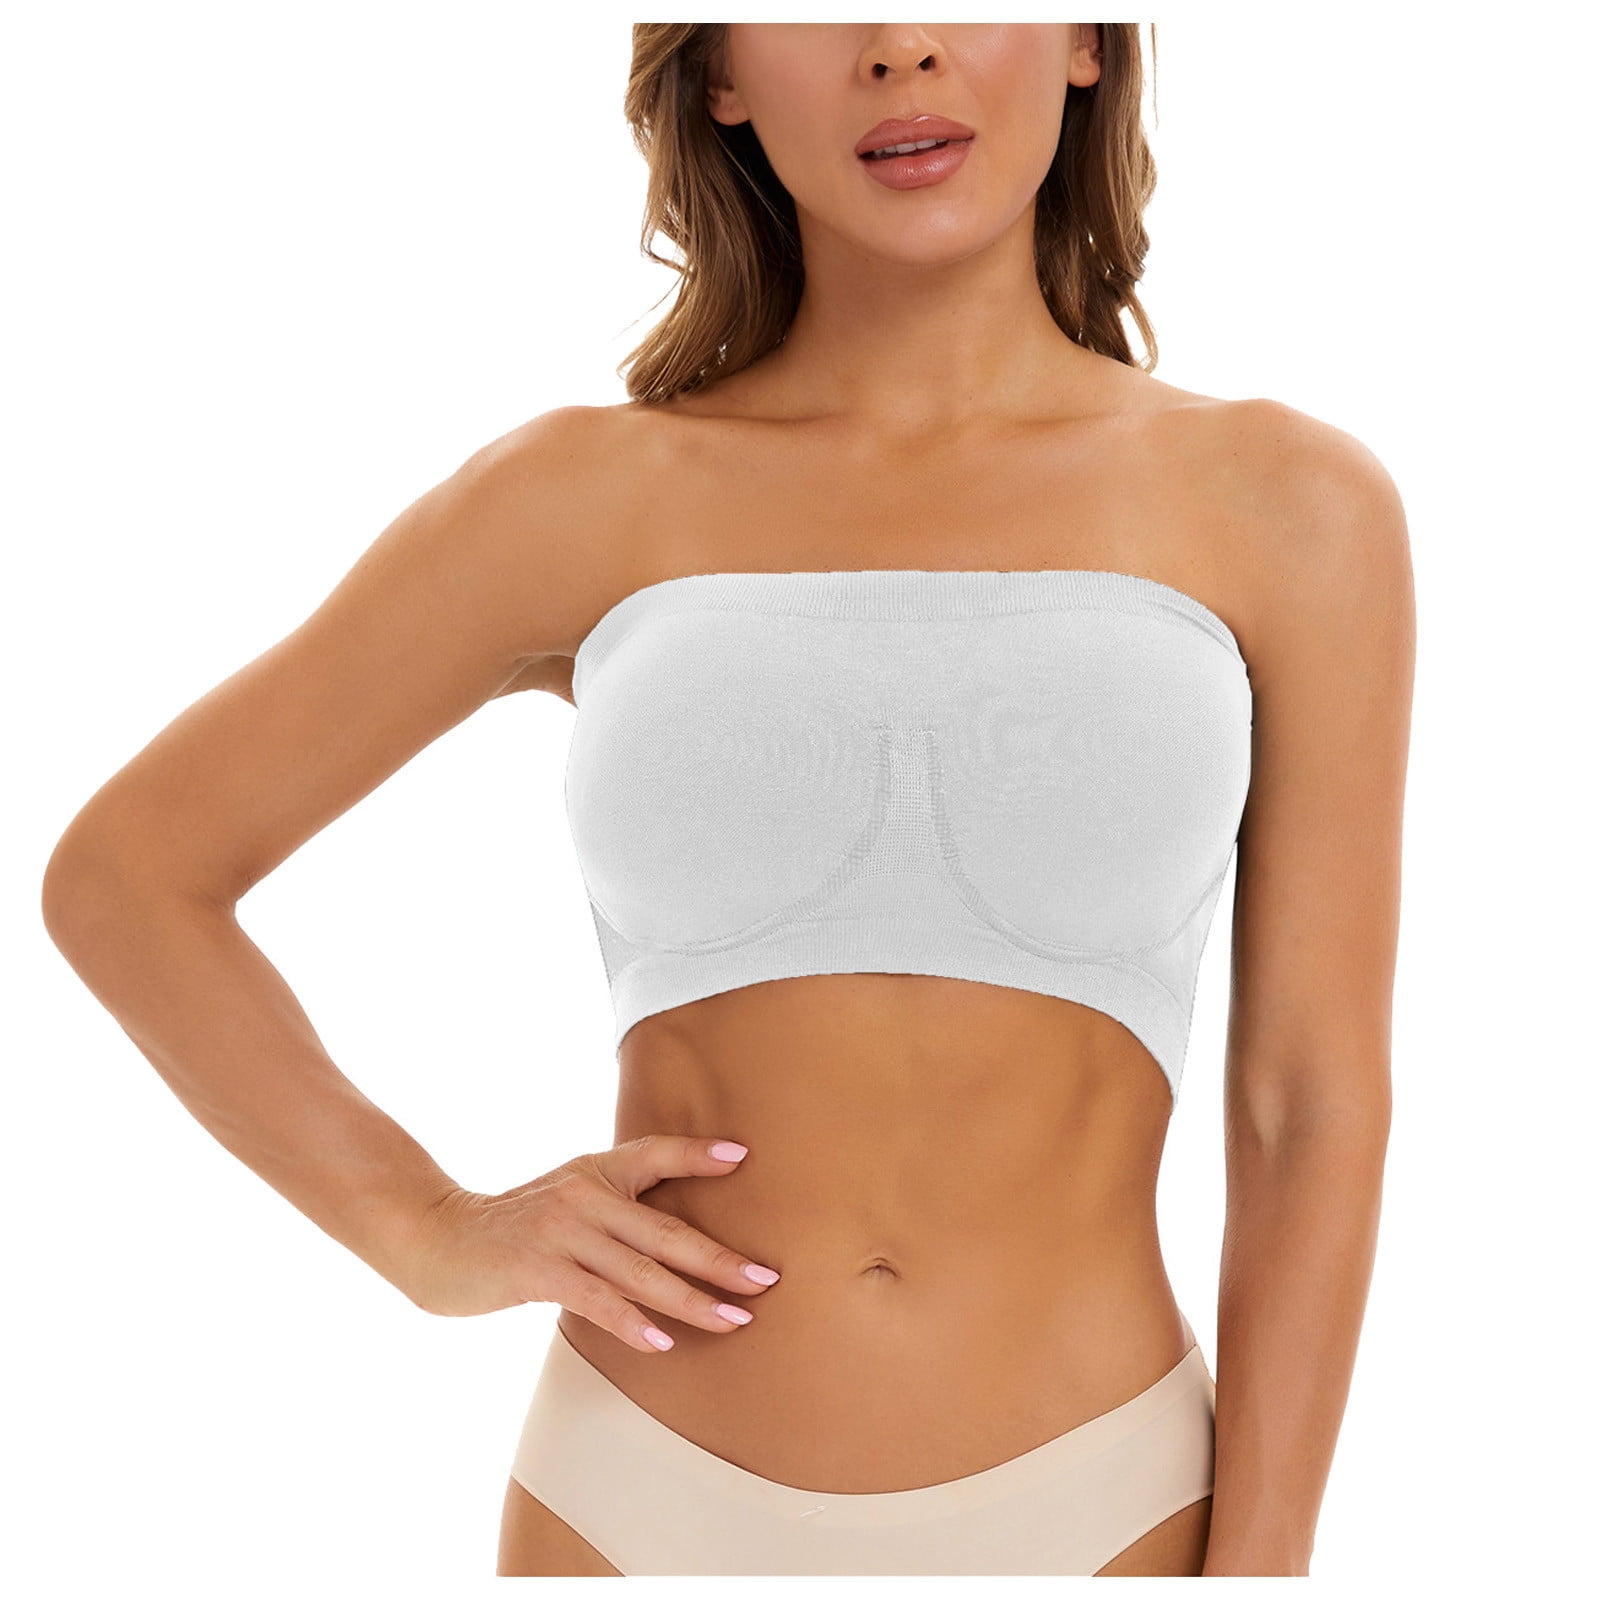  Womens Tube Crop Shapewear Tops Strapless Cute Sexy Cotton  Tops ASHGREY L